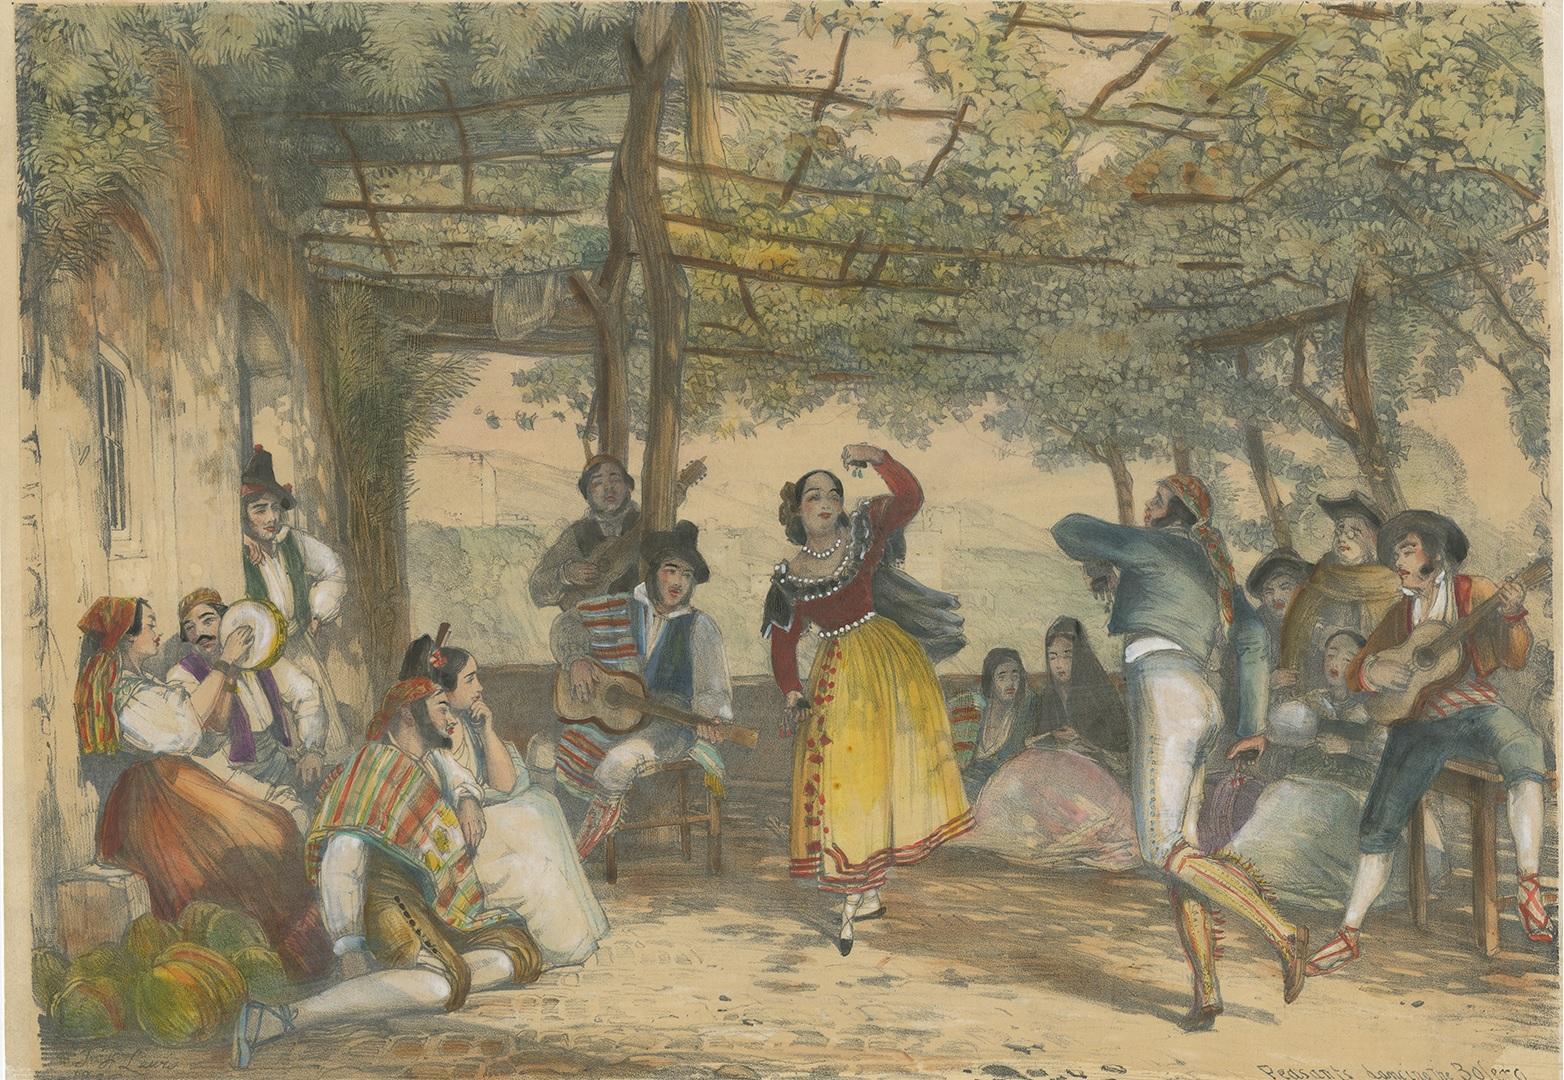 Antique print titled 'Peasants dancing Bolero'. Scene in a courtyard, with a couple of young peasants dancing under a trellis overgrown with grapevine. Tinted lithograph with additional hand-colouring. Frontispiece and first plate in the book